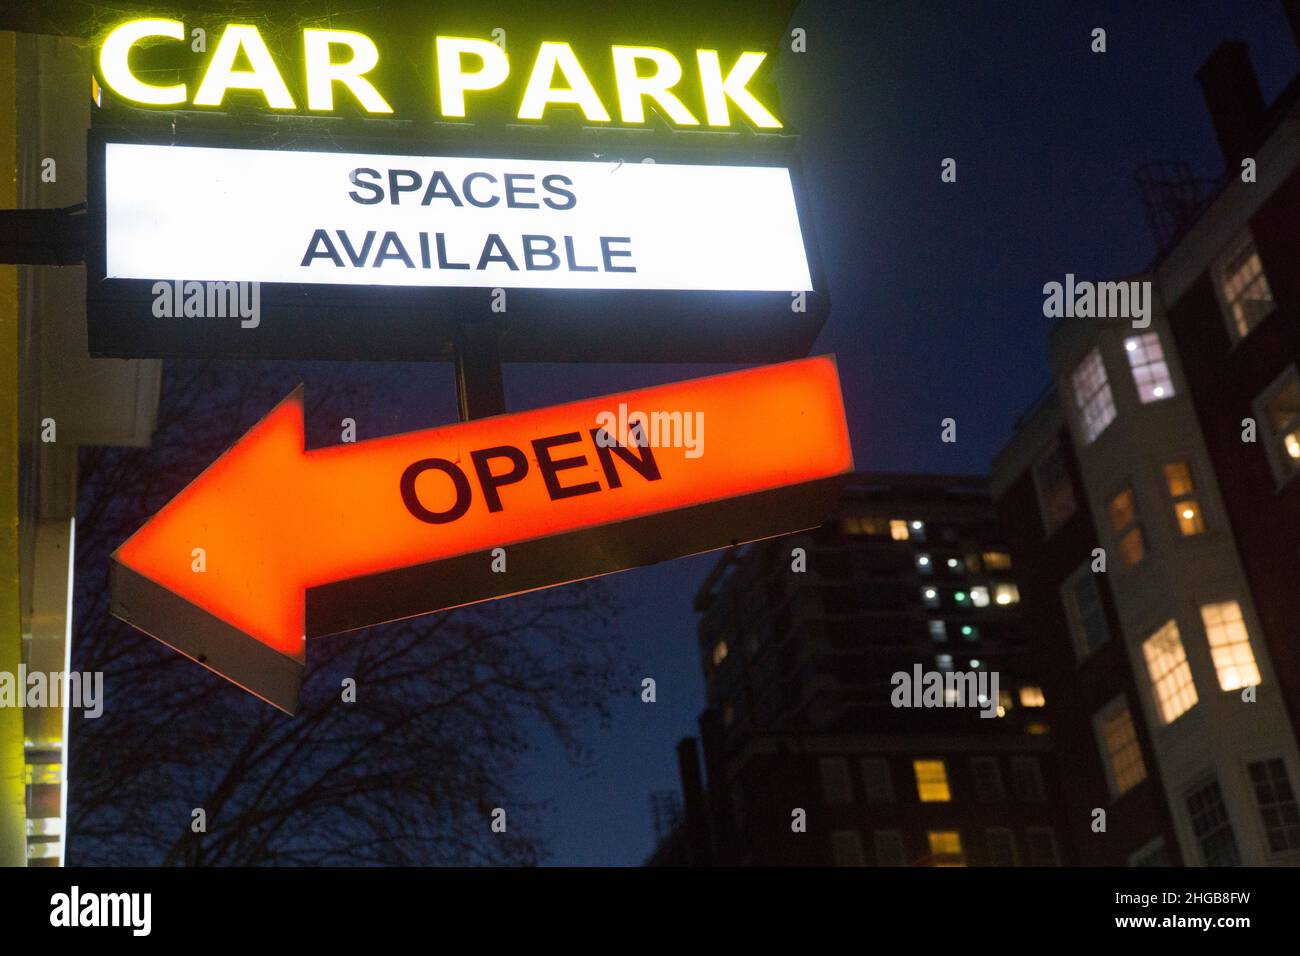 London, UK, 16 January 2022: The signs say Car Park Spaces Available Open but increasingly central London is expensive to drive and park in. This car Stock Photo